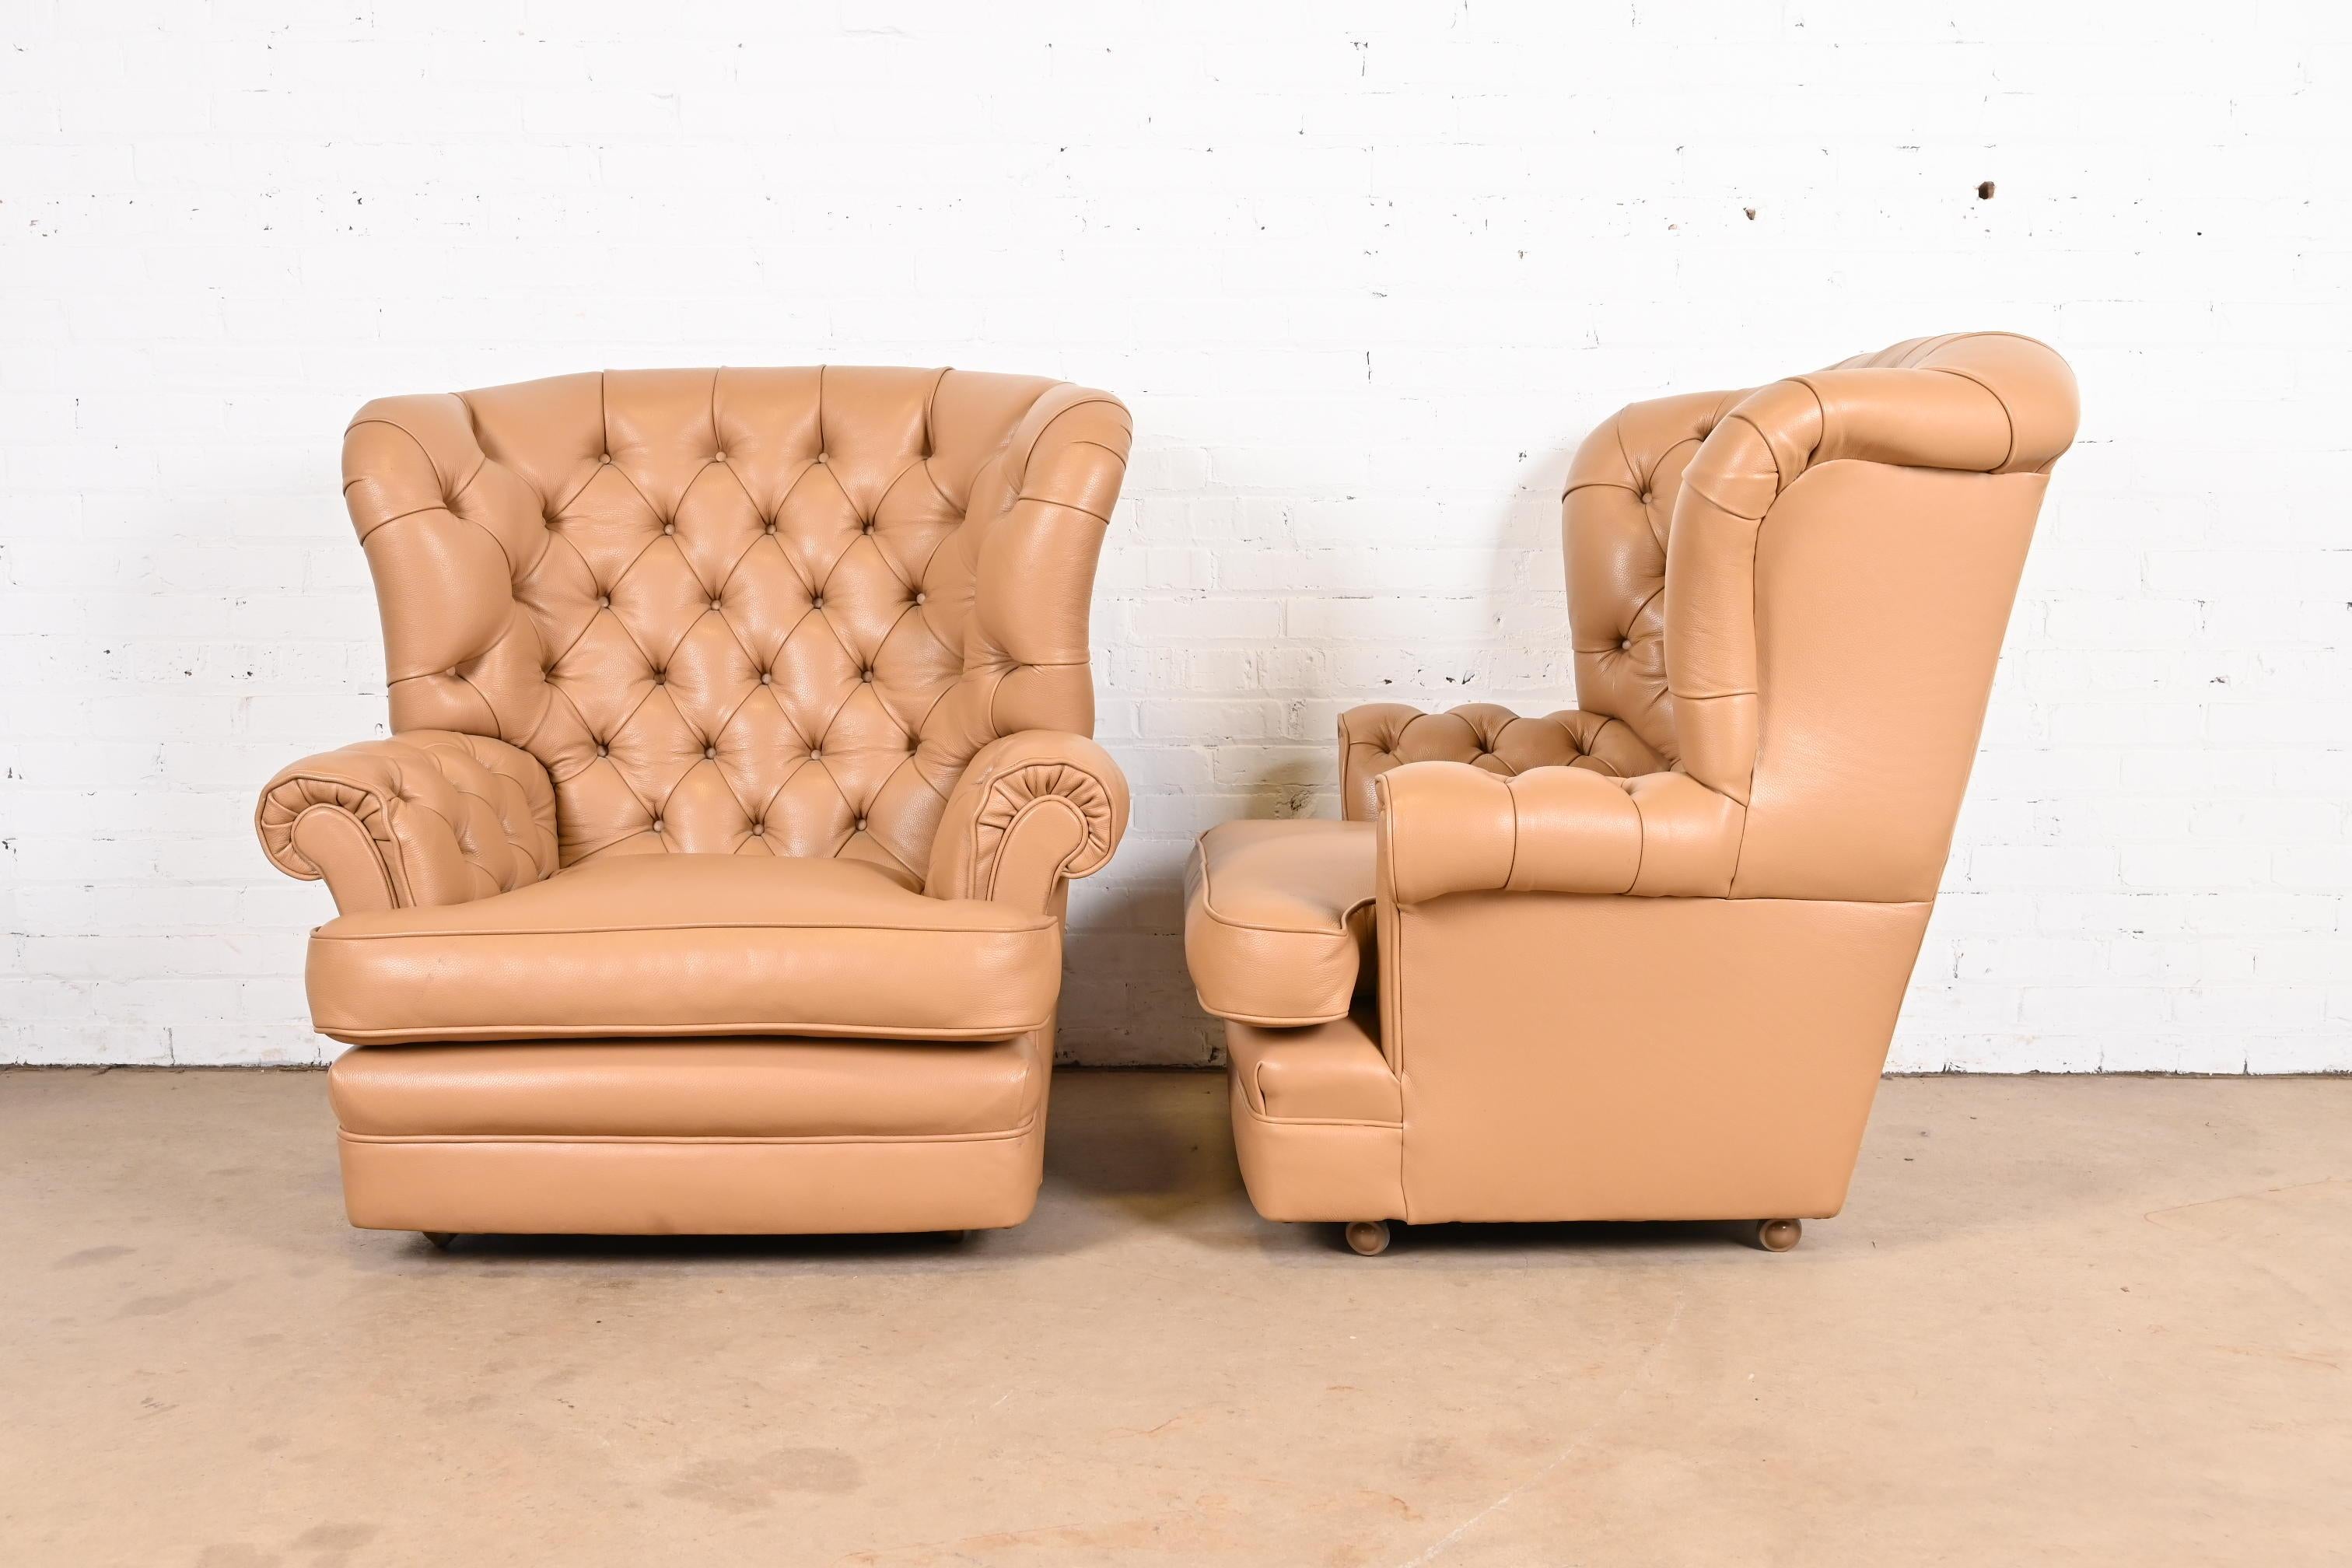 Vintage Tufted Leather Chesterfield Wingback Lounge Chairs, Pair For Sale 3